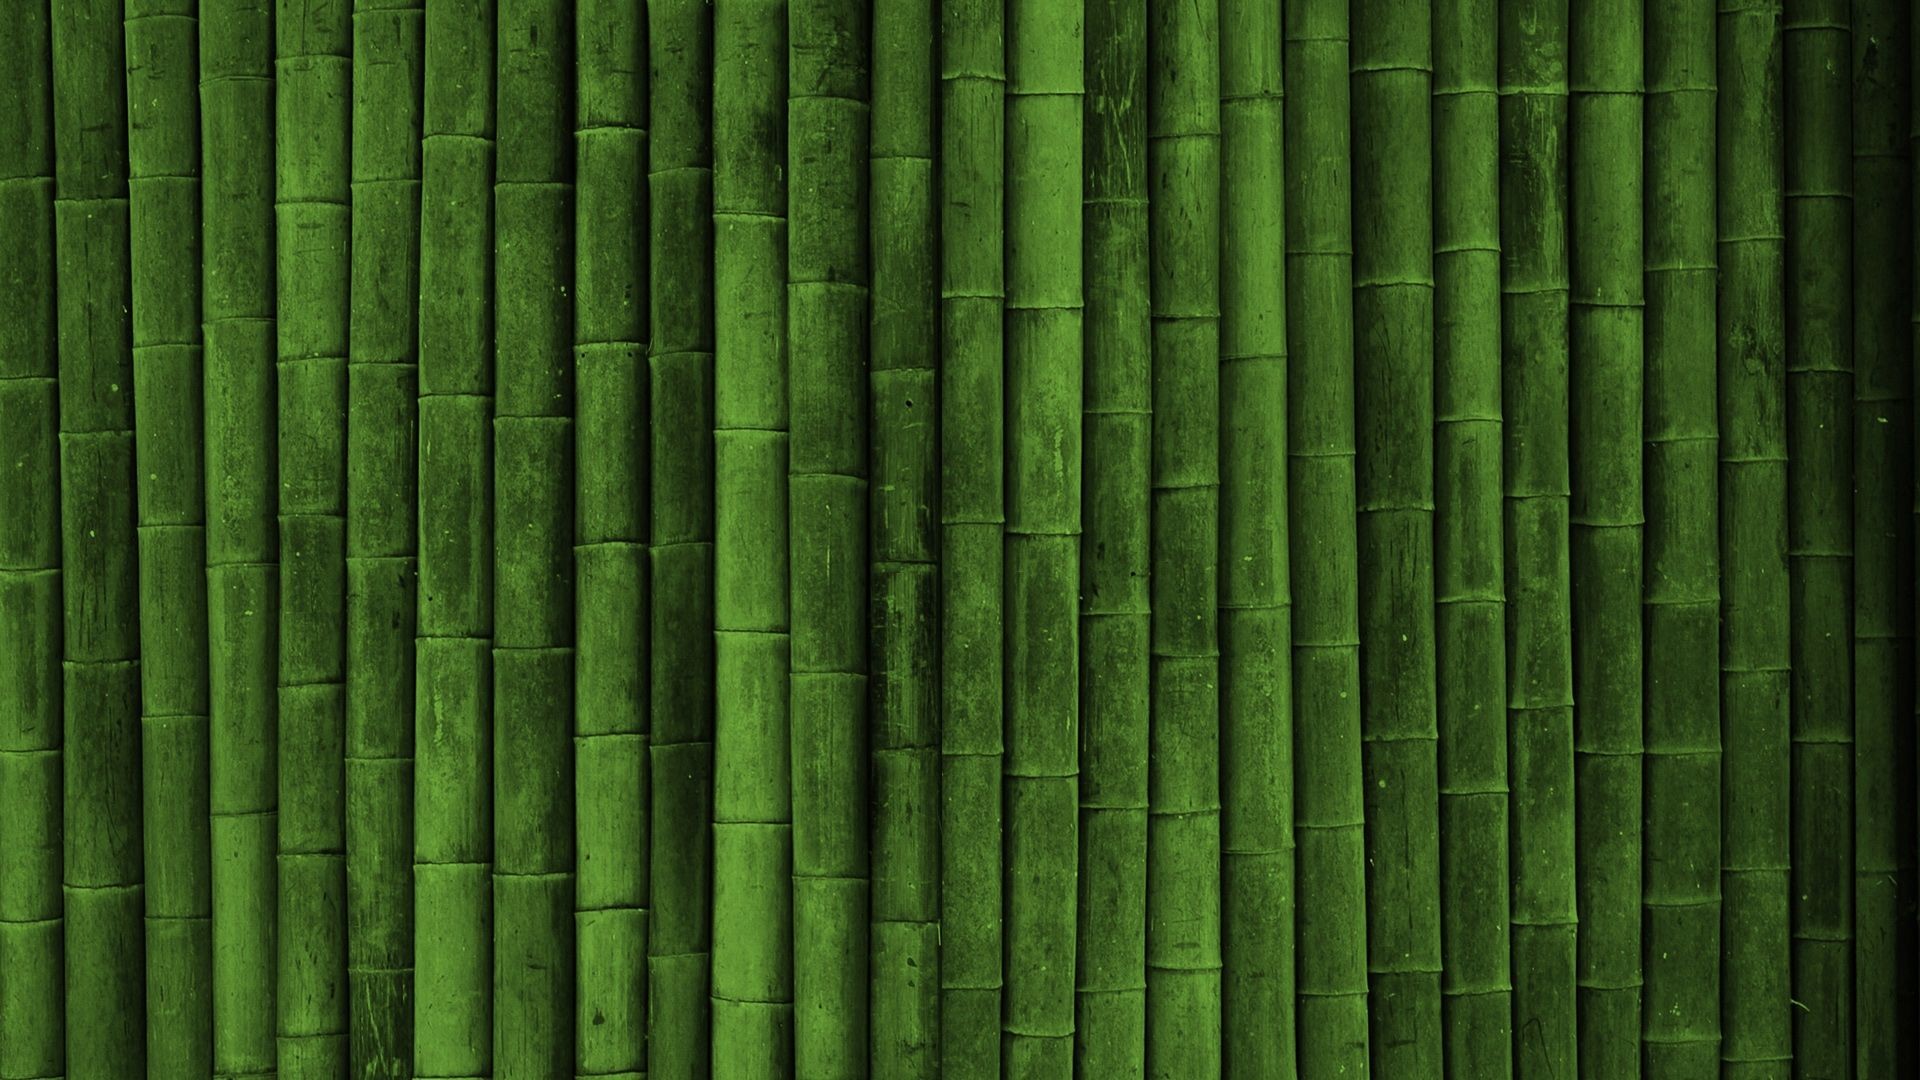 Wallpaper Green HD With Resolution 1920X1080 pixel. You can make this wallpaper for your Desktop Computer Backgrounds, Mac Wallpapers, Android Lock screen or iPhone Screensavers